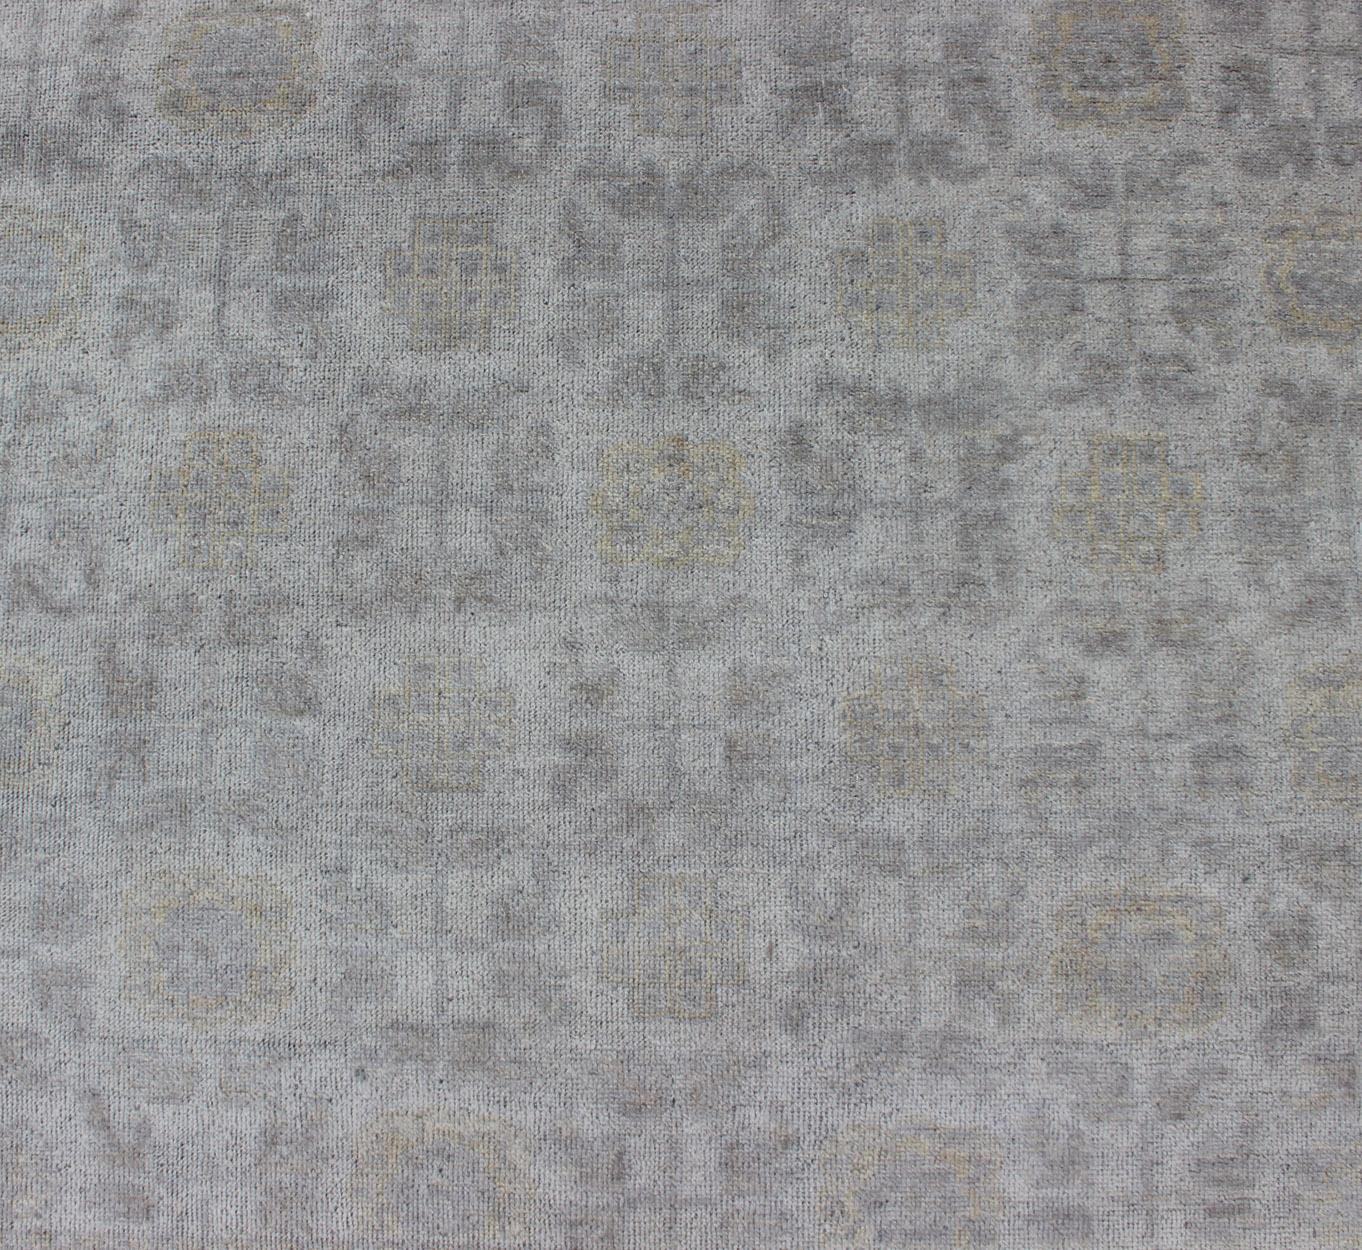 Square size Khotan Rug in Ivory, Soft Yellow, Light Gray/Light Purple and Neutral tones by  Keivan Woven Arts. 21st Century Square Khotan Rug

Measures: 6'7 x 6'7 

Square Size Hand Knotted Khotan Rug, Keivan Woven Arts rug/OB-9365708, 21st Century